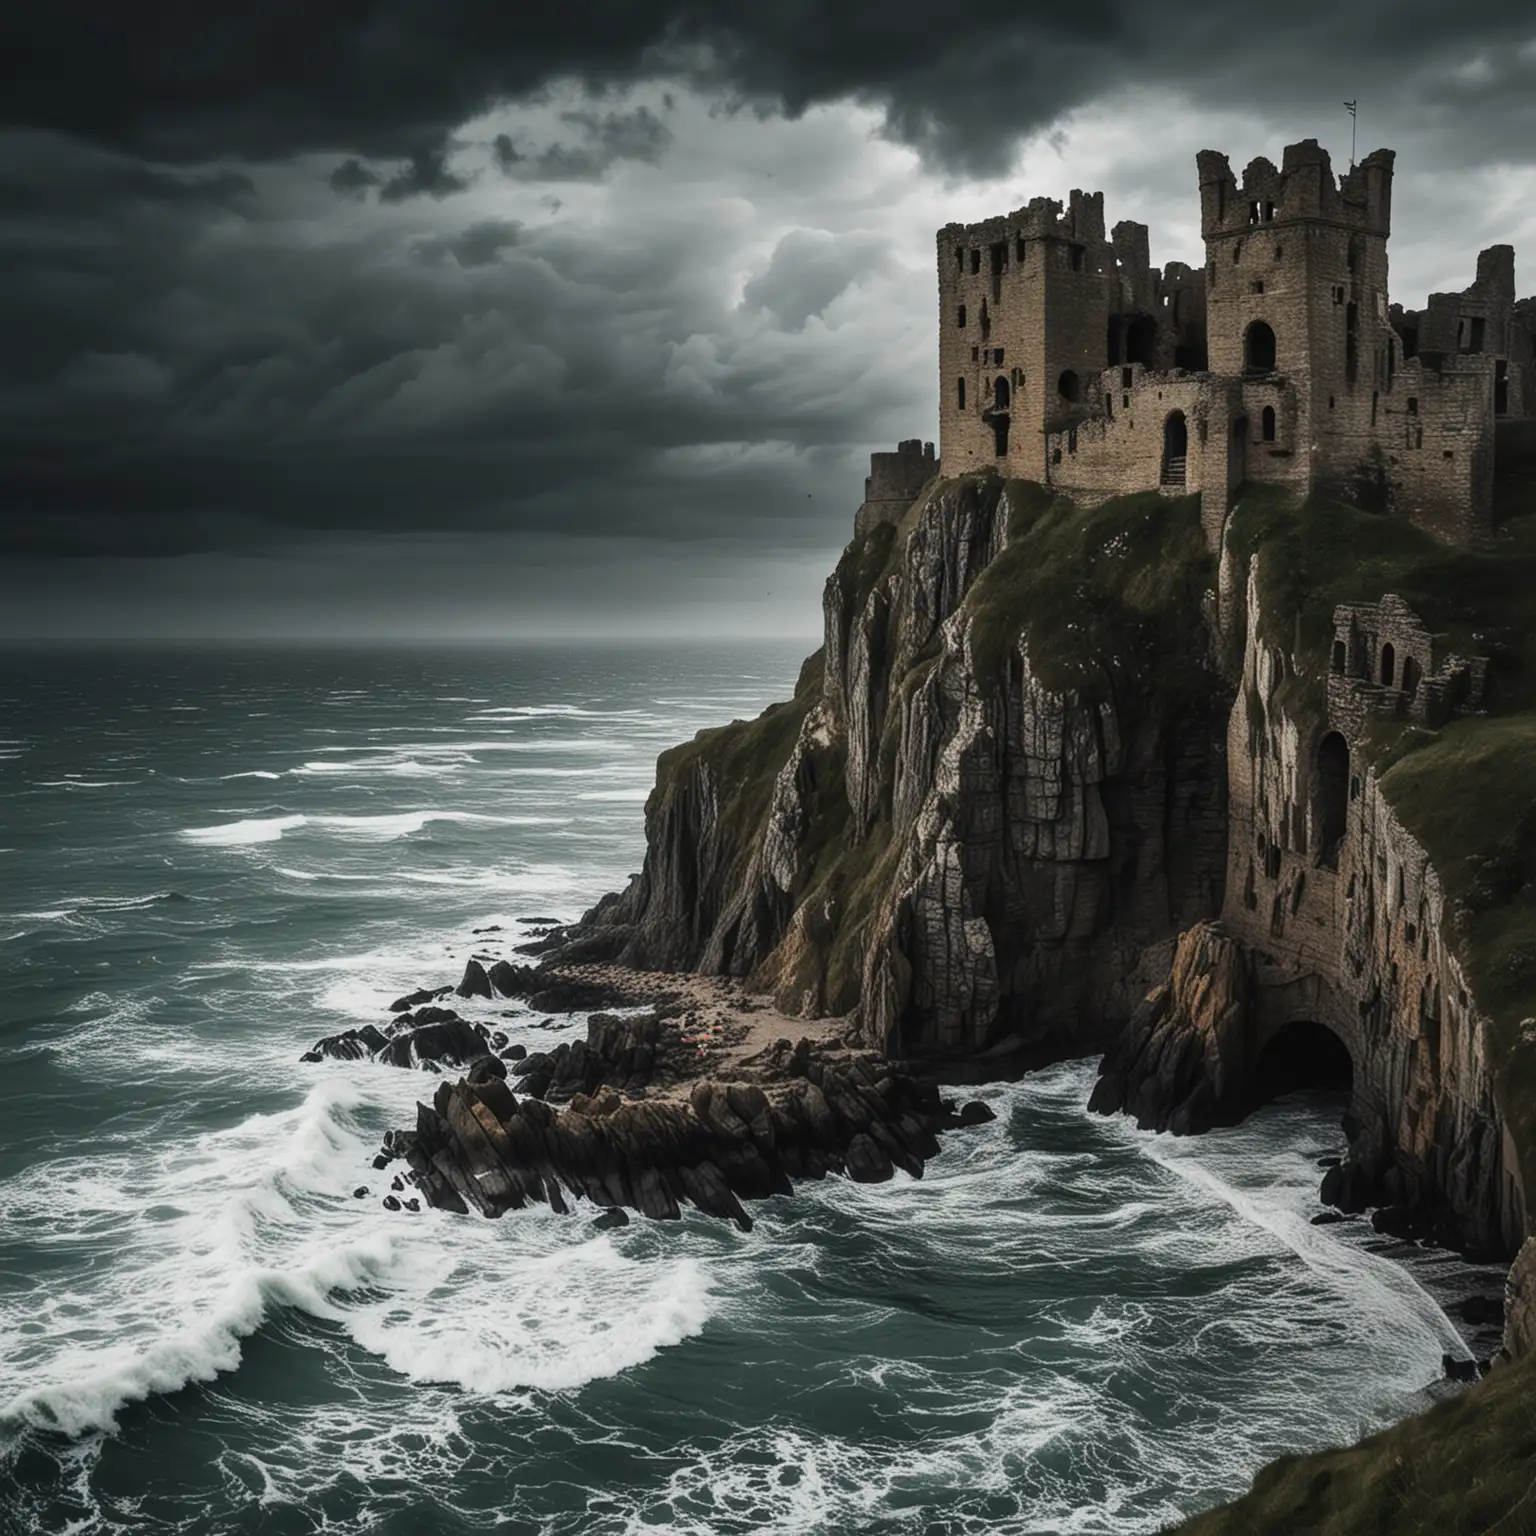 Eerie-Ruined-Castle-on-Cliff-Overlooking-Stormy-Sea